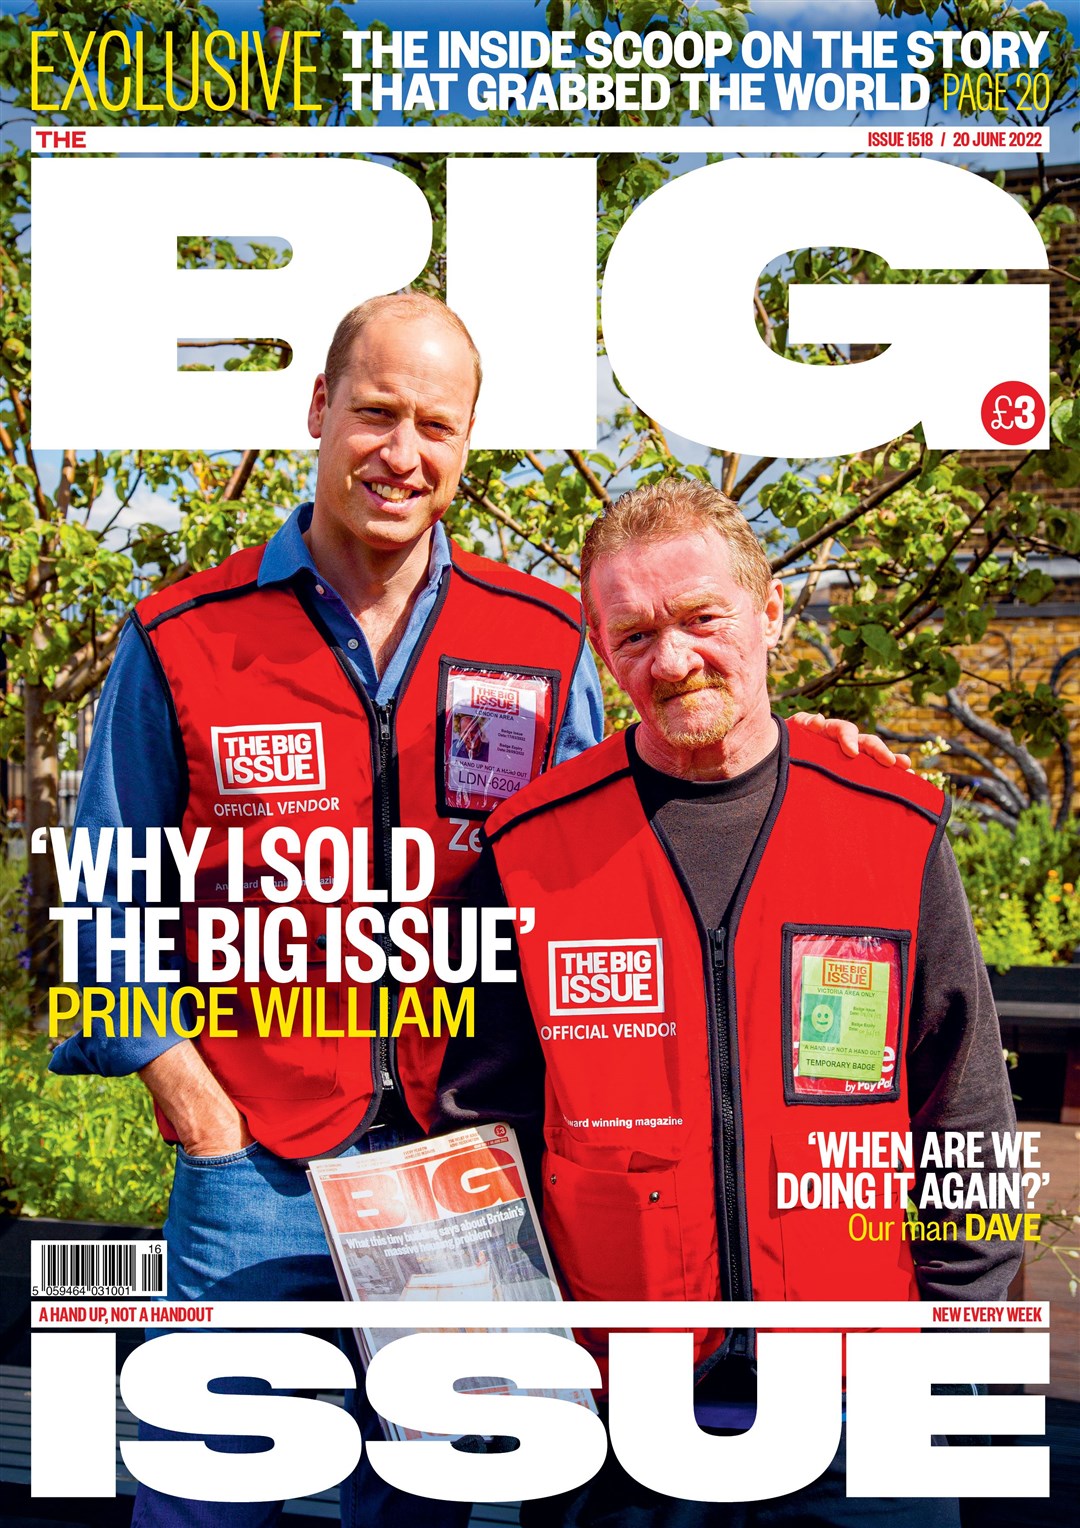 William and Dave Martin were the cover stars of the Big Issue edition they sold last year (Andy Parsons/Big Issue/PA)